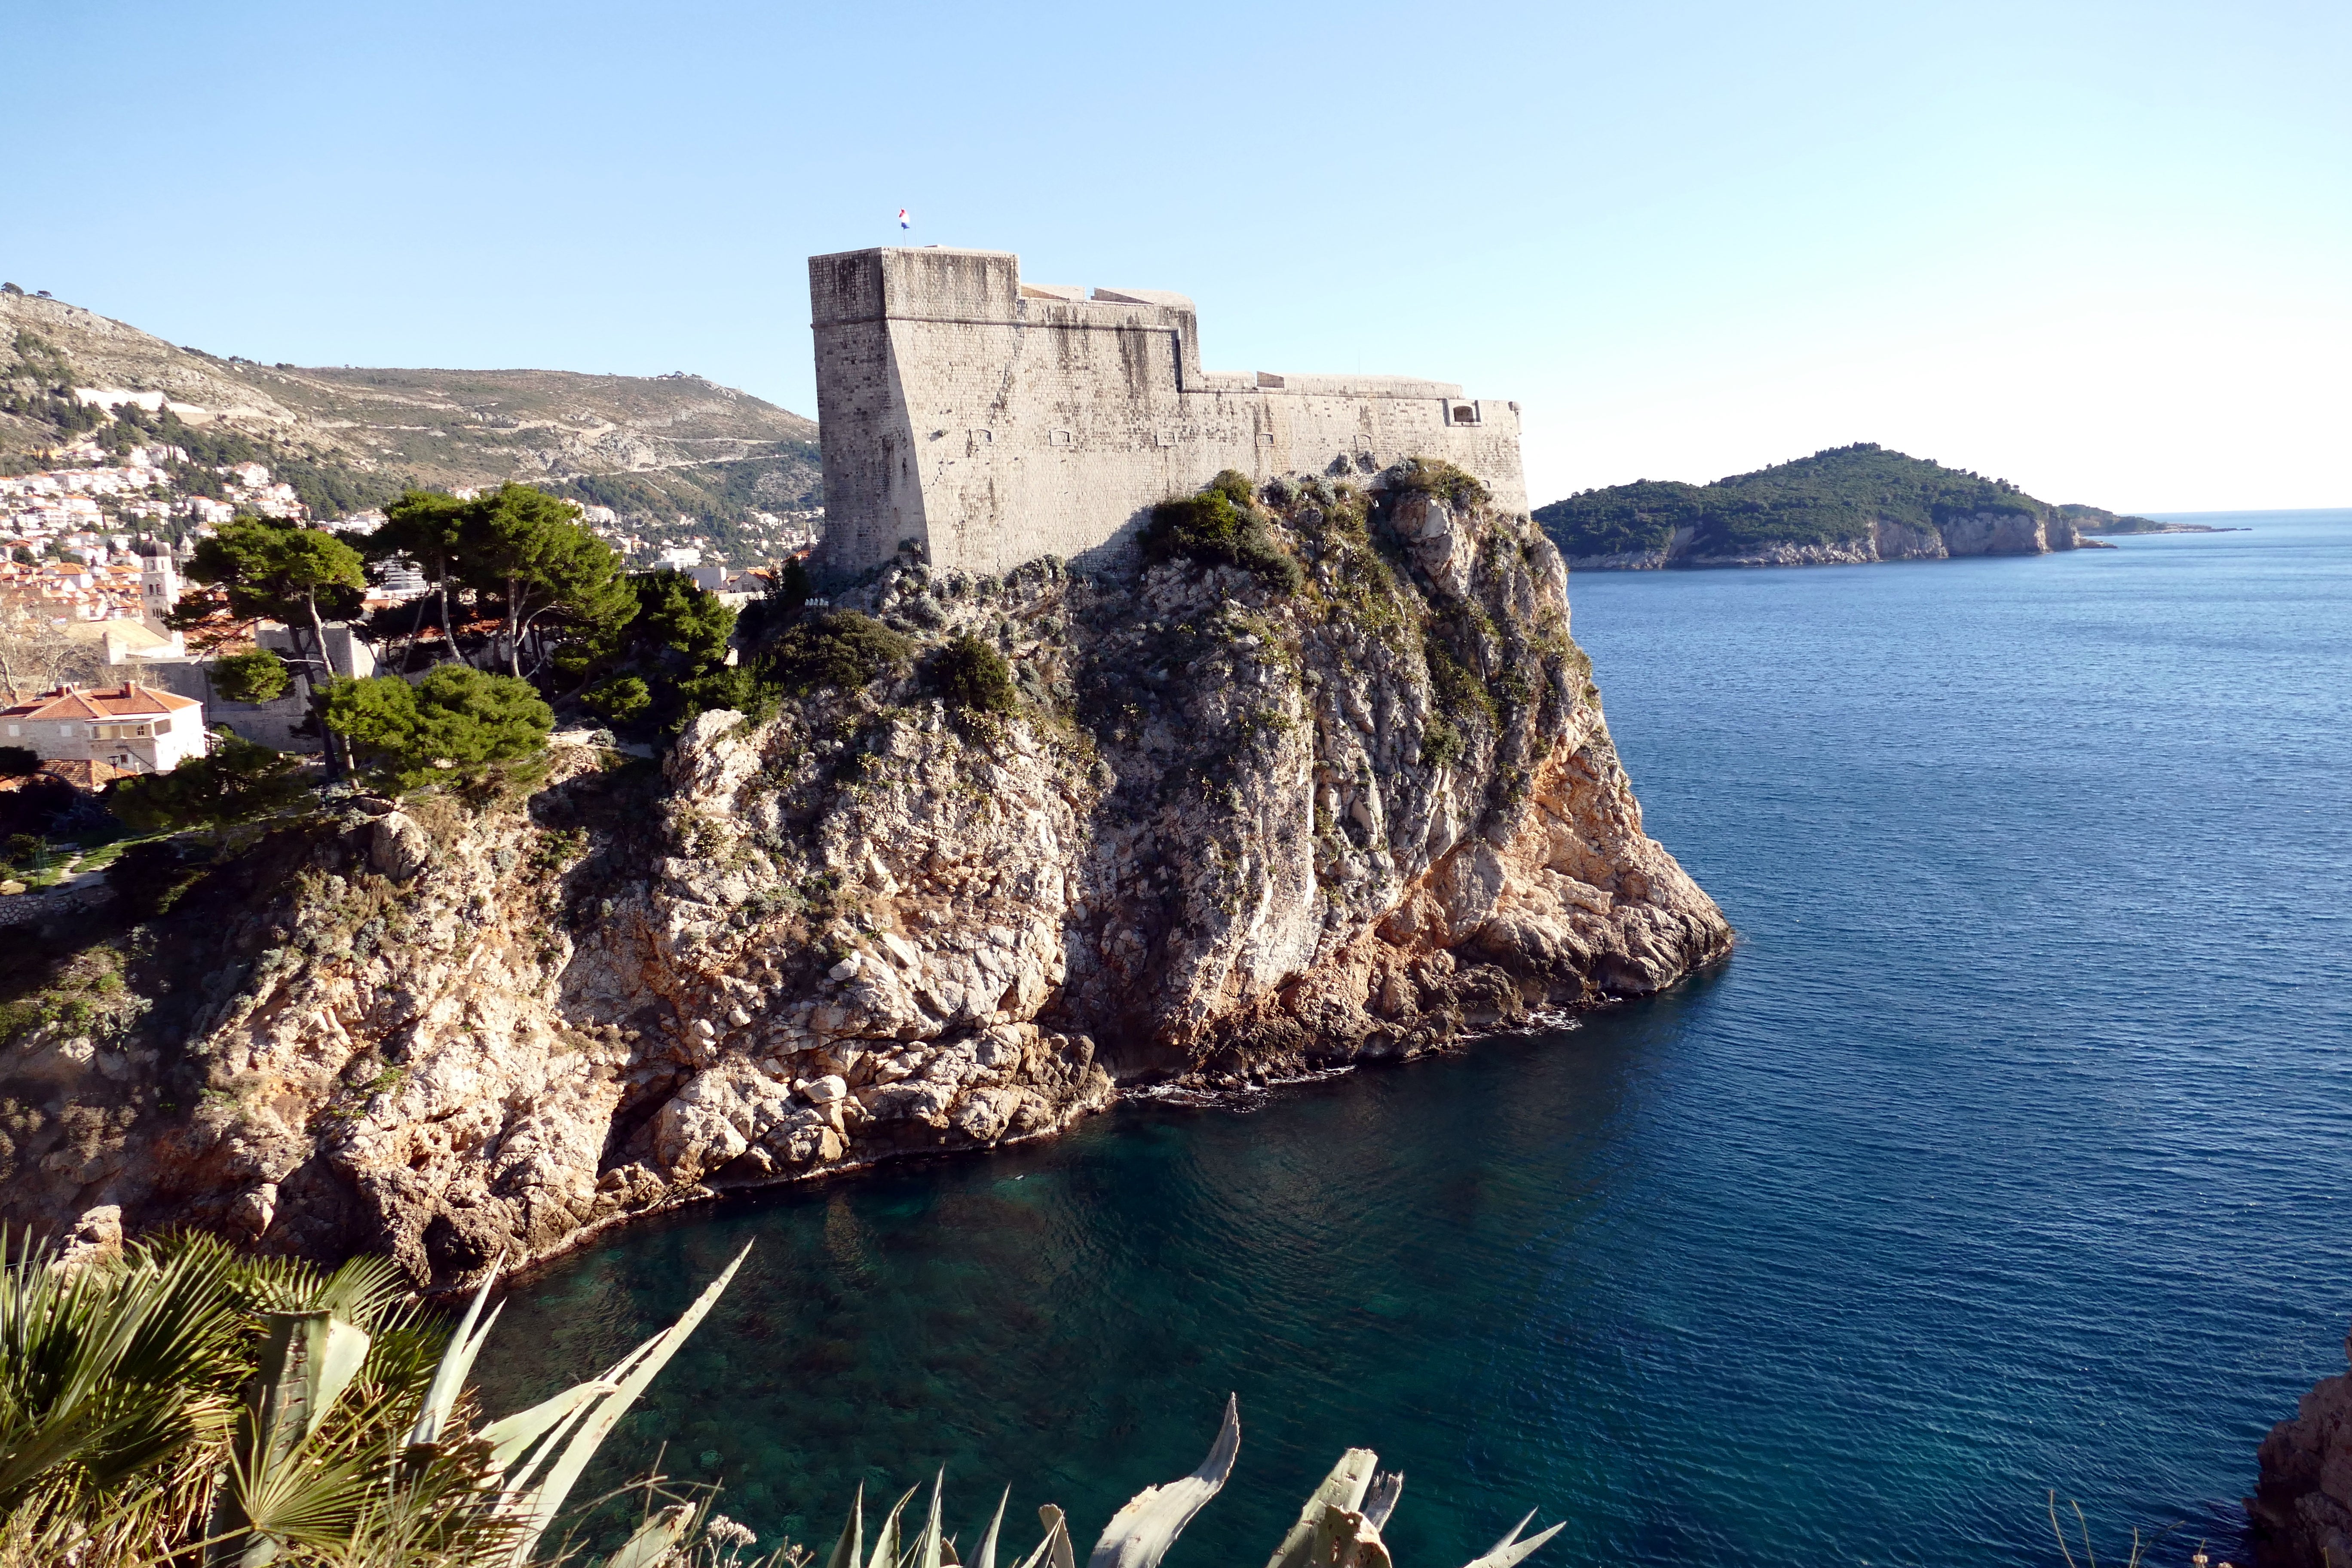 Used as a filming location for Game of Thrones, Fort Lovrijenac and the surrounding Pile Gate is popular with tourist